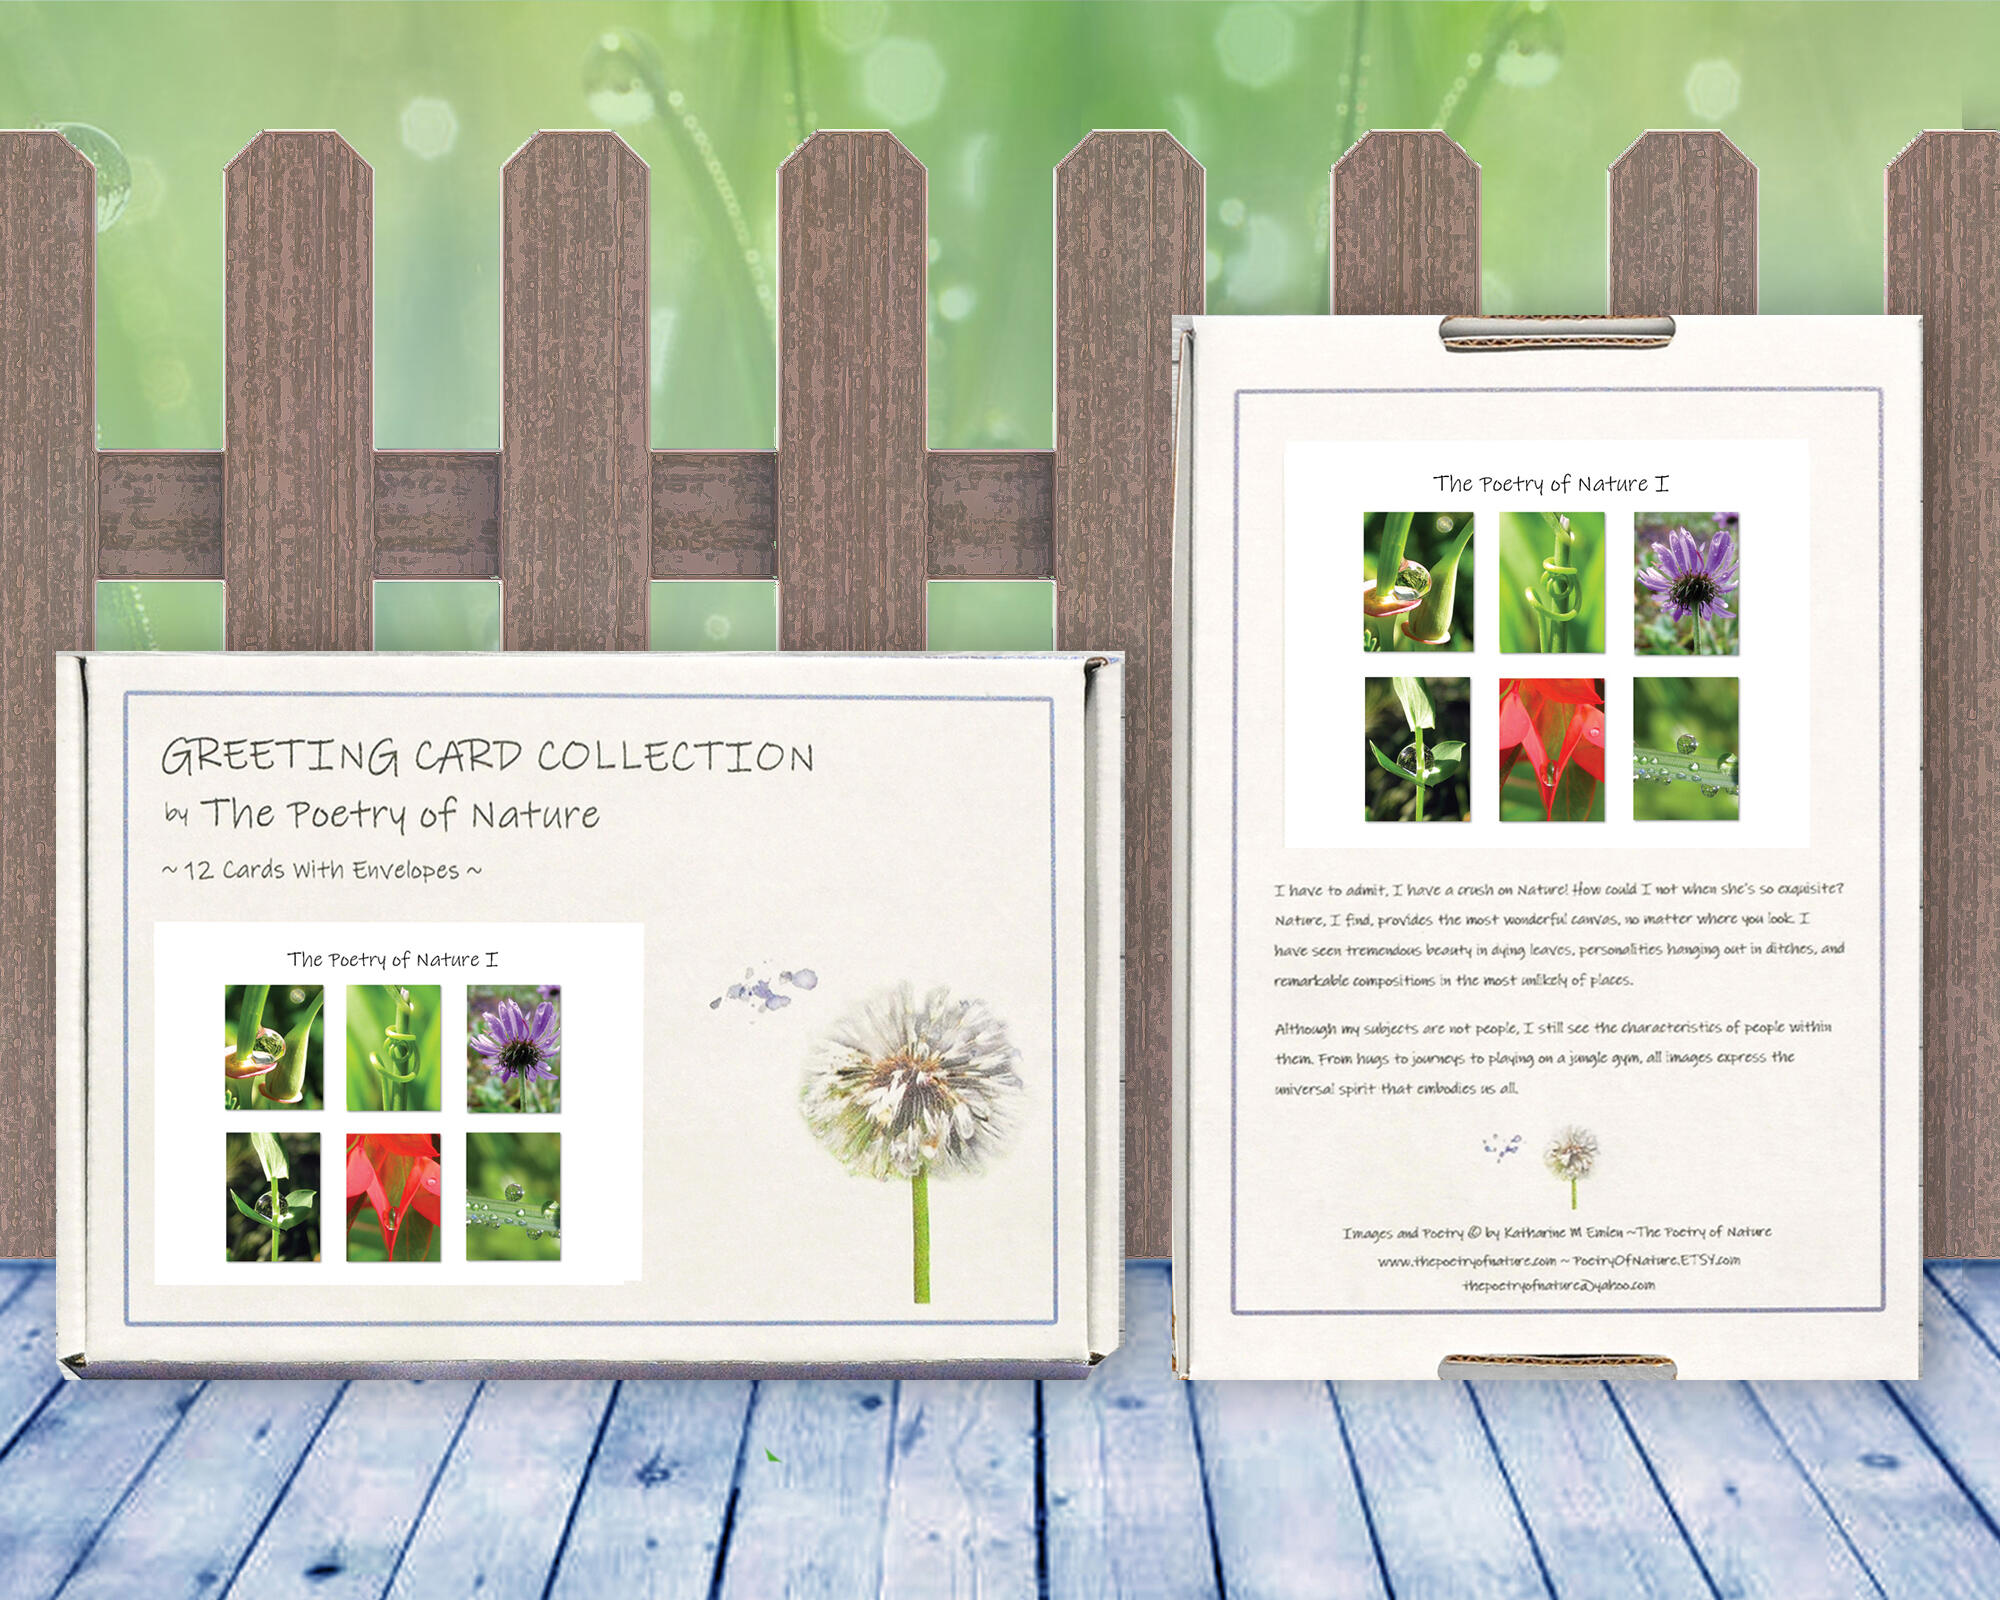 The Poetry of Nature I - Greeting Card Collection by The Poetry of Nature